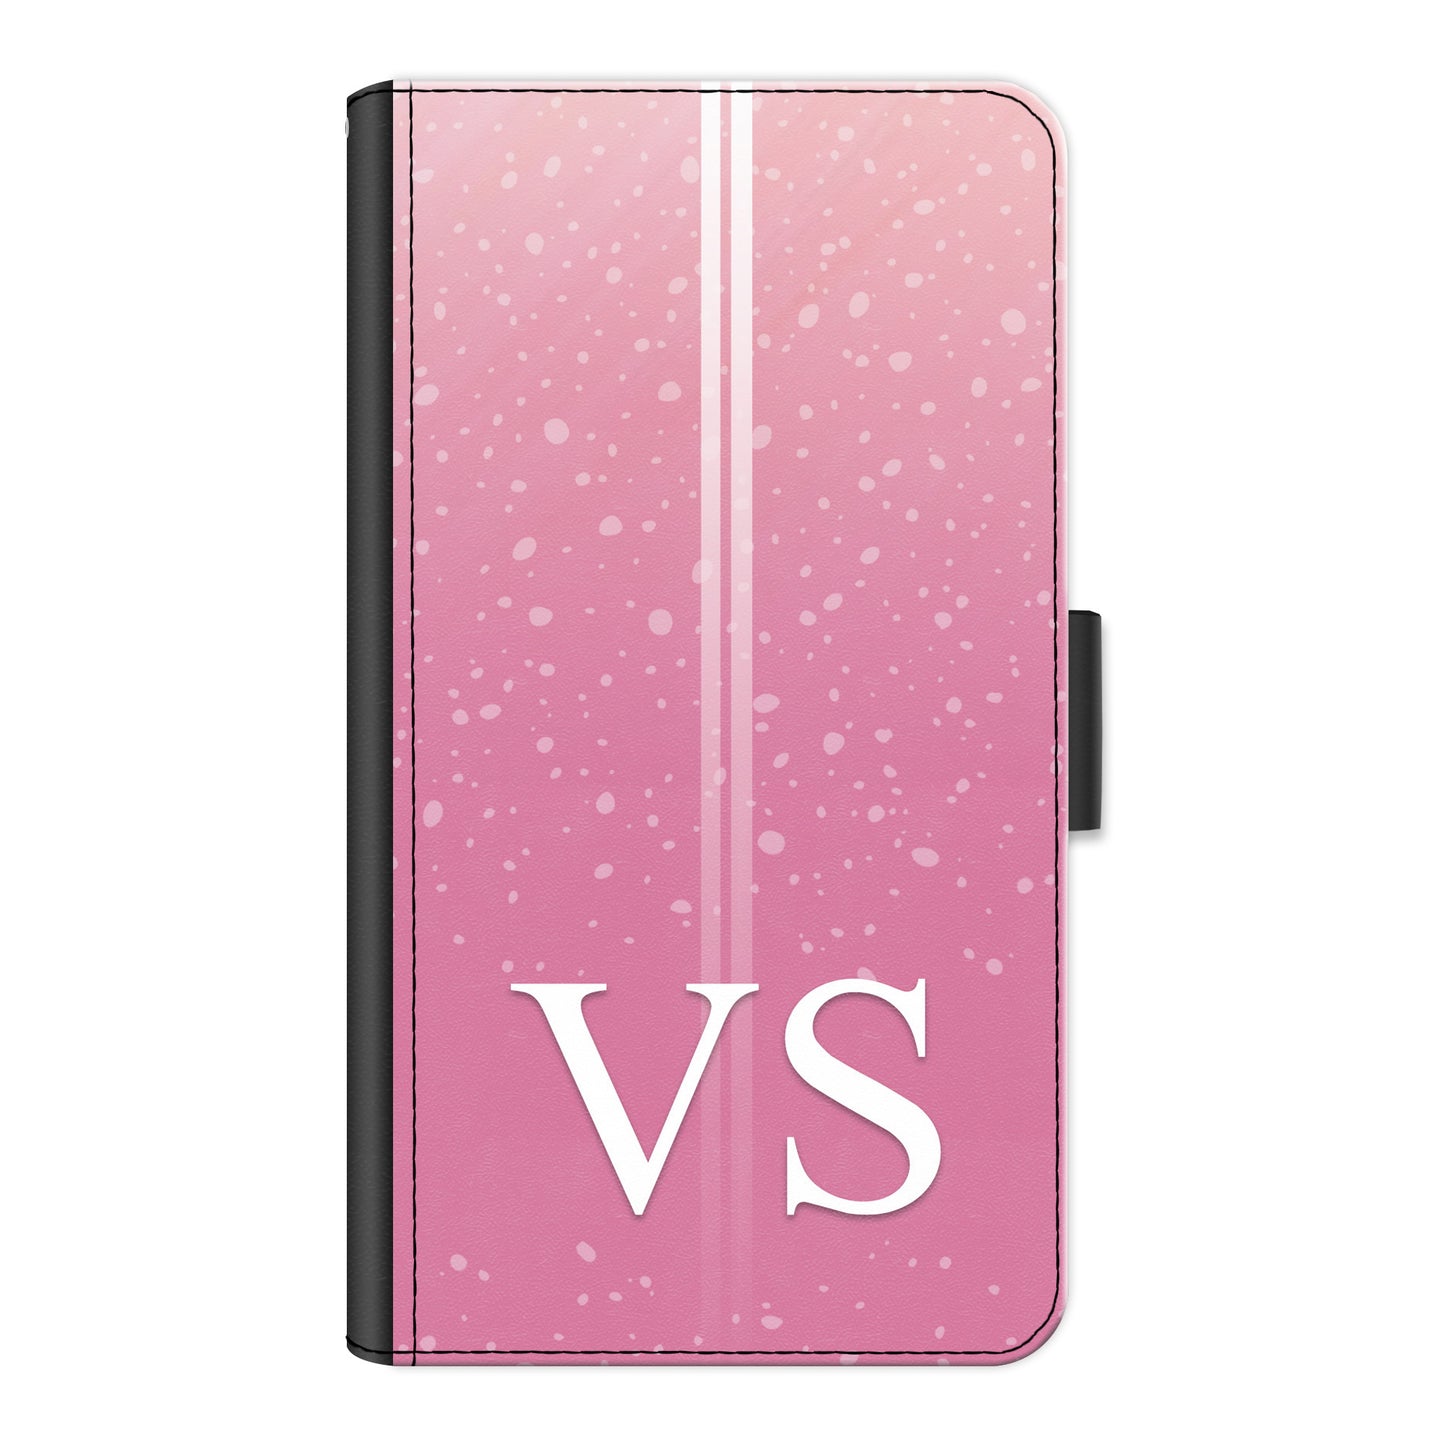 Personalised Google Phone Leather Wallet with White Initials, Pin Stripes and Droplets on Pink